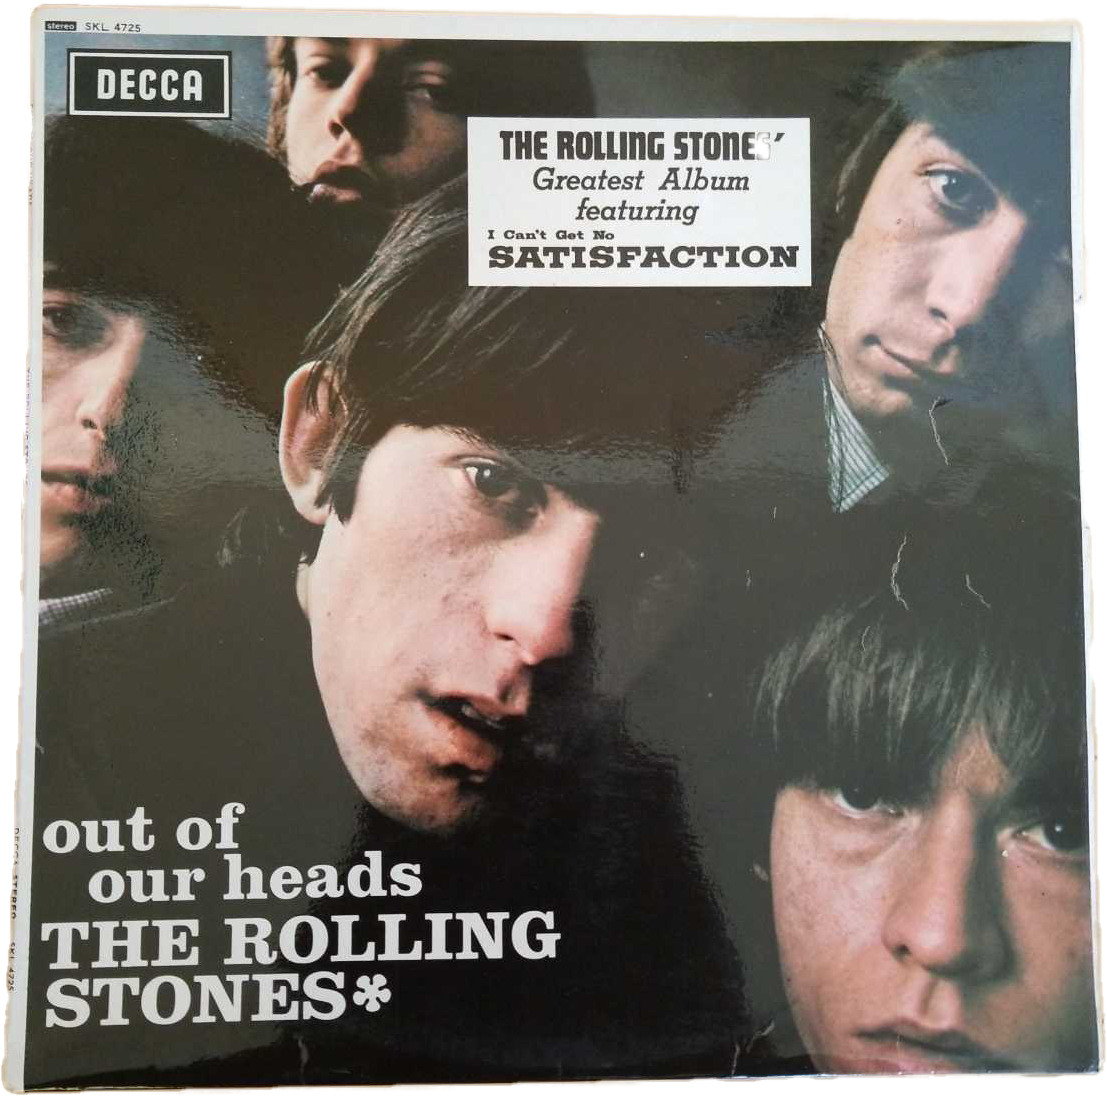 【THE ROLLING STONES(ローリング・ストーンズ):OUT OF OUR HEADS】のレコード出張買取実績